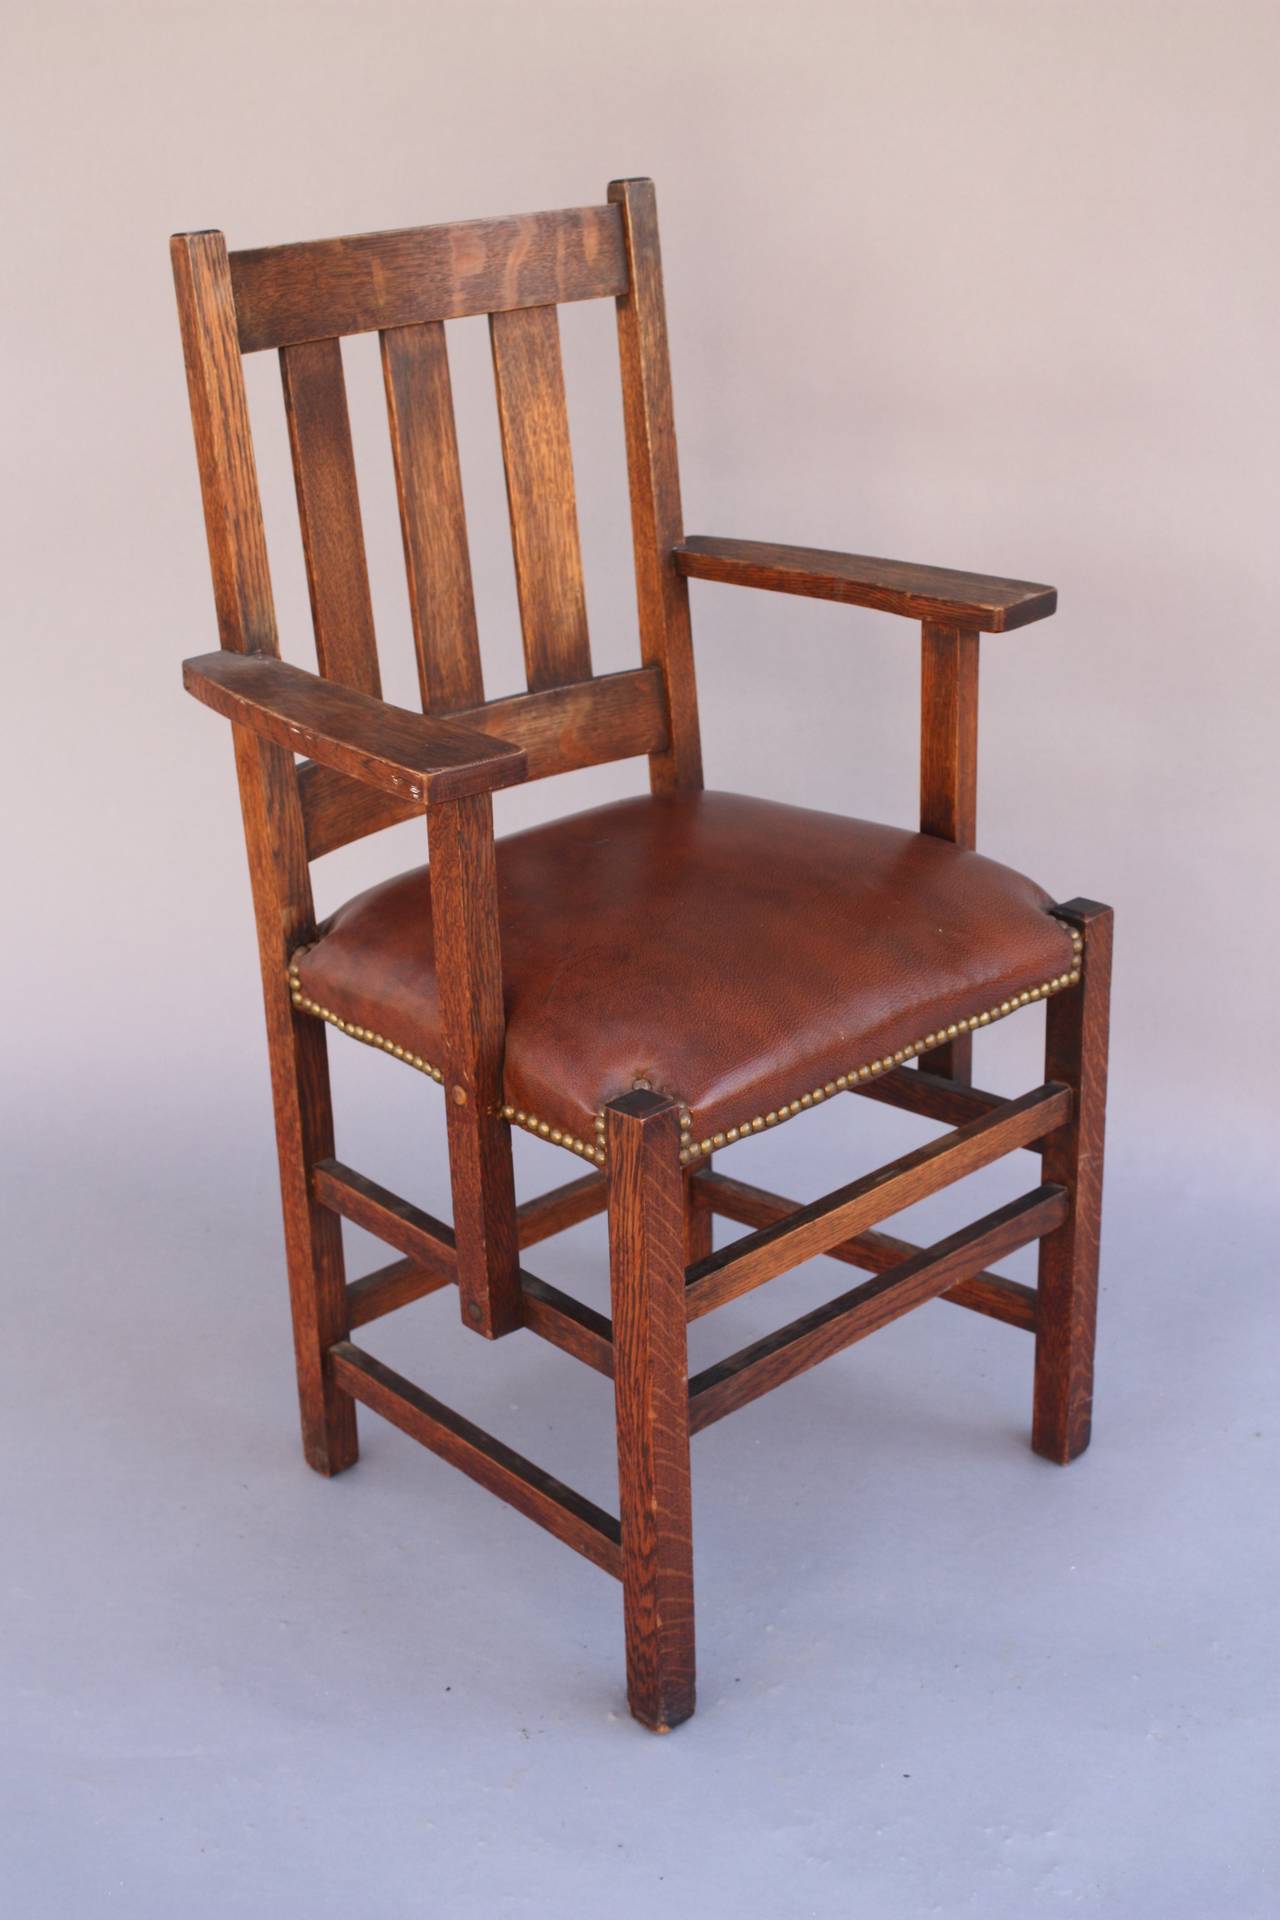 Circa 1910 set of 5 side chairs and one armchairs. Signed. Quartersawn oak and leather seats.  armchair measures 23.75